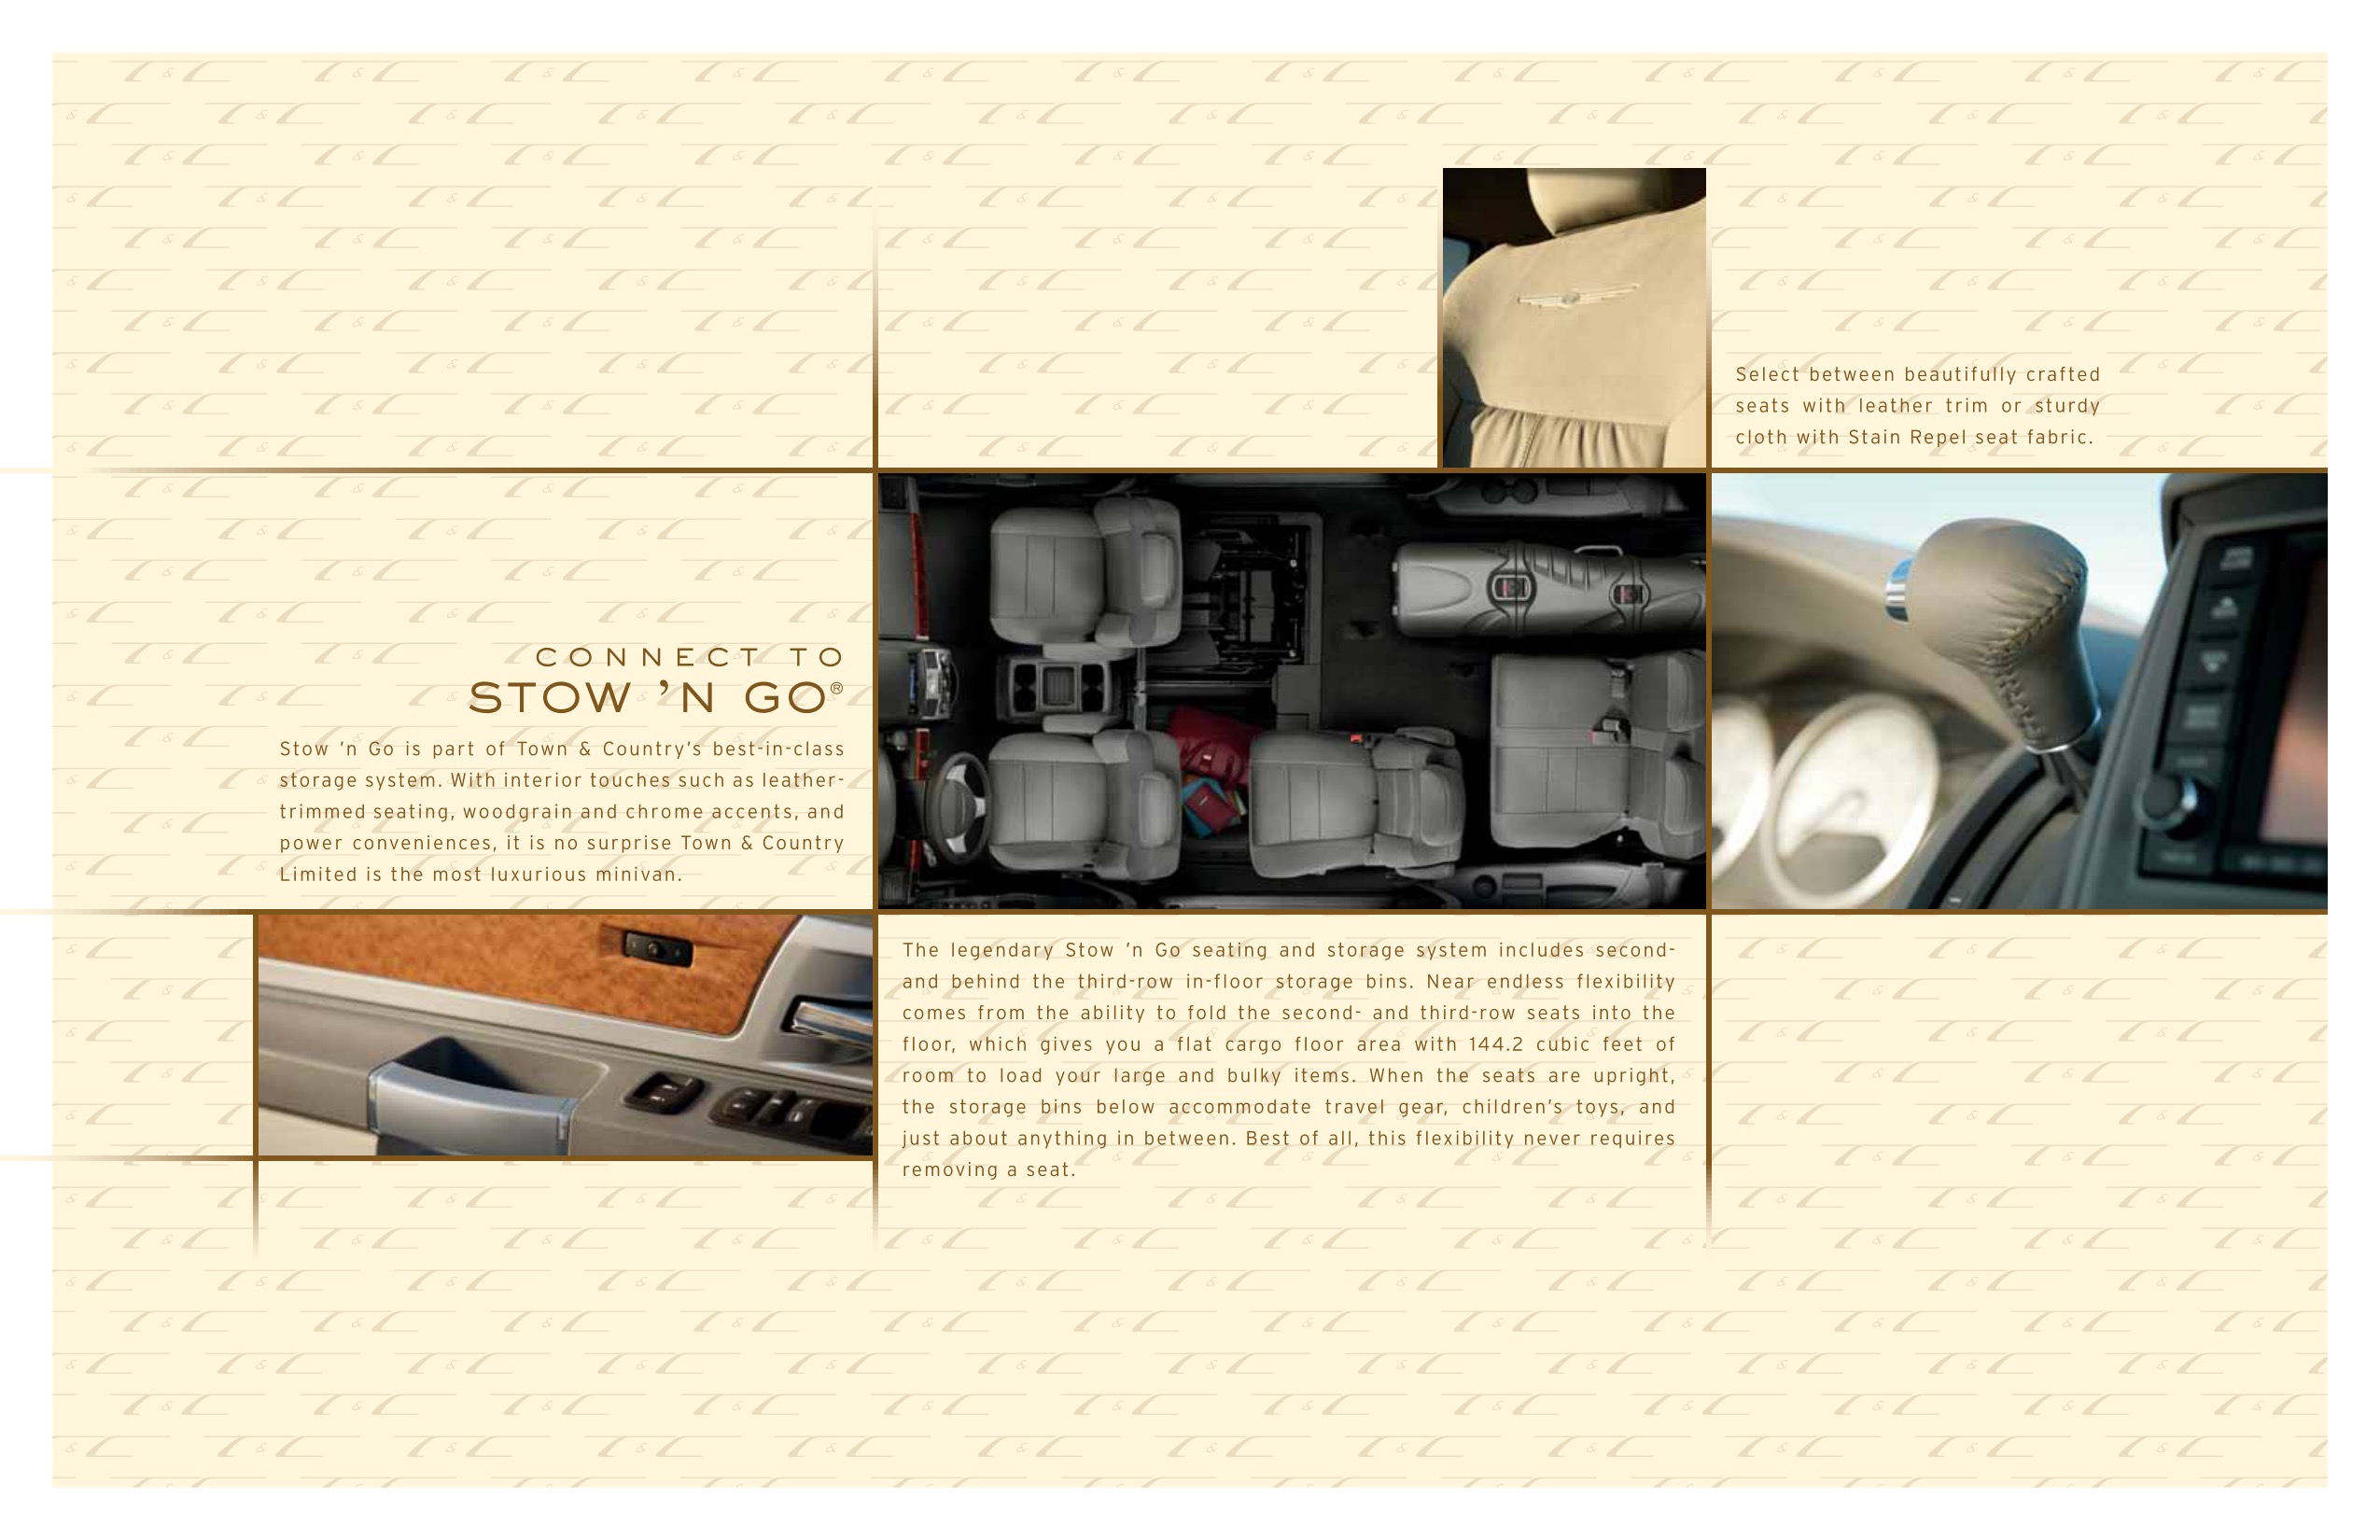 2010 Chrysler Town & Country Brochure Page 21